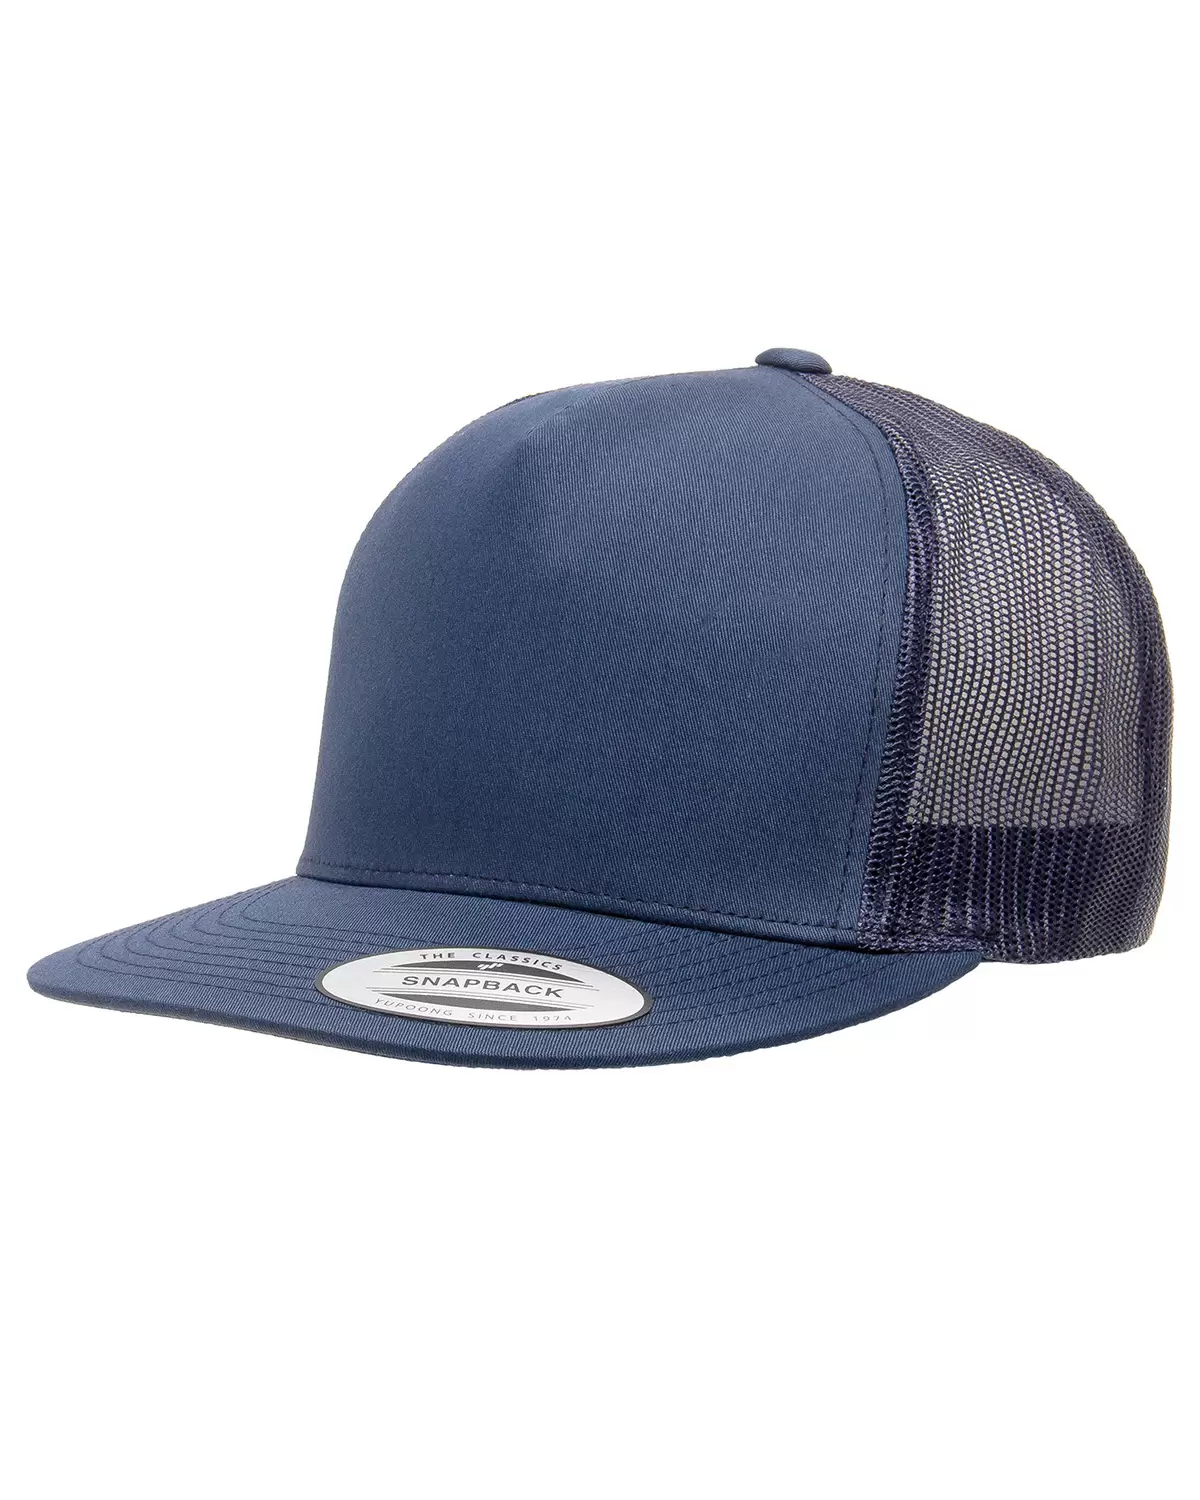 Yupoong-Flex Fit 6006 Five-Panel Classic Cap - Trucker From